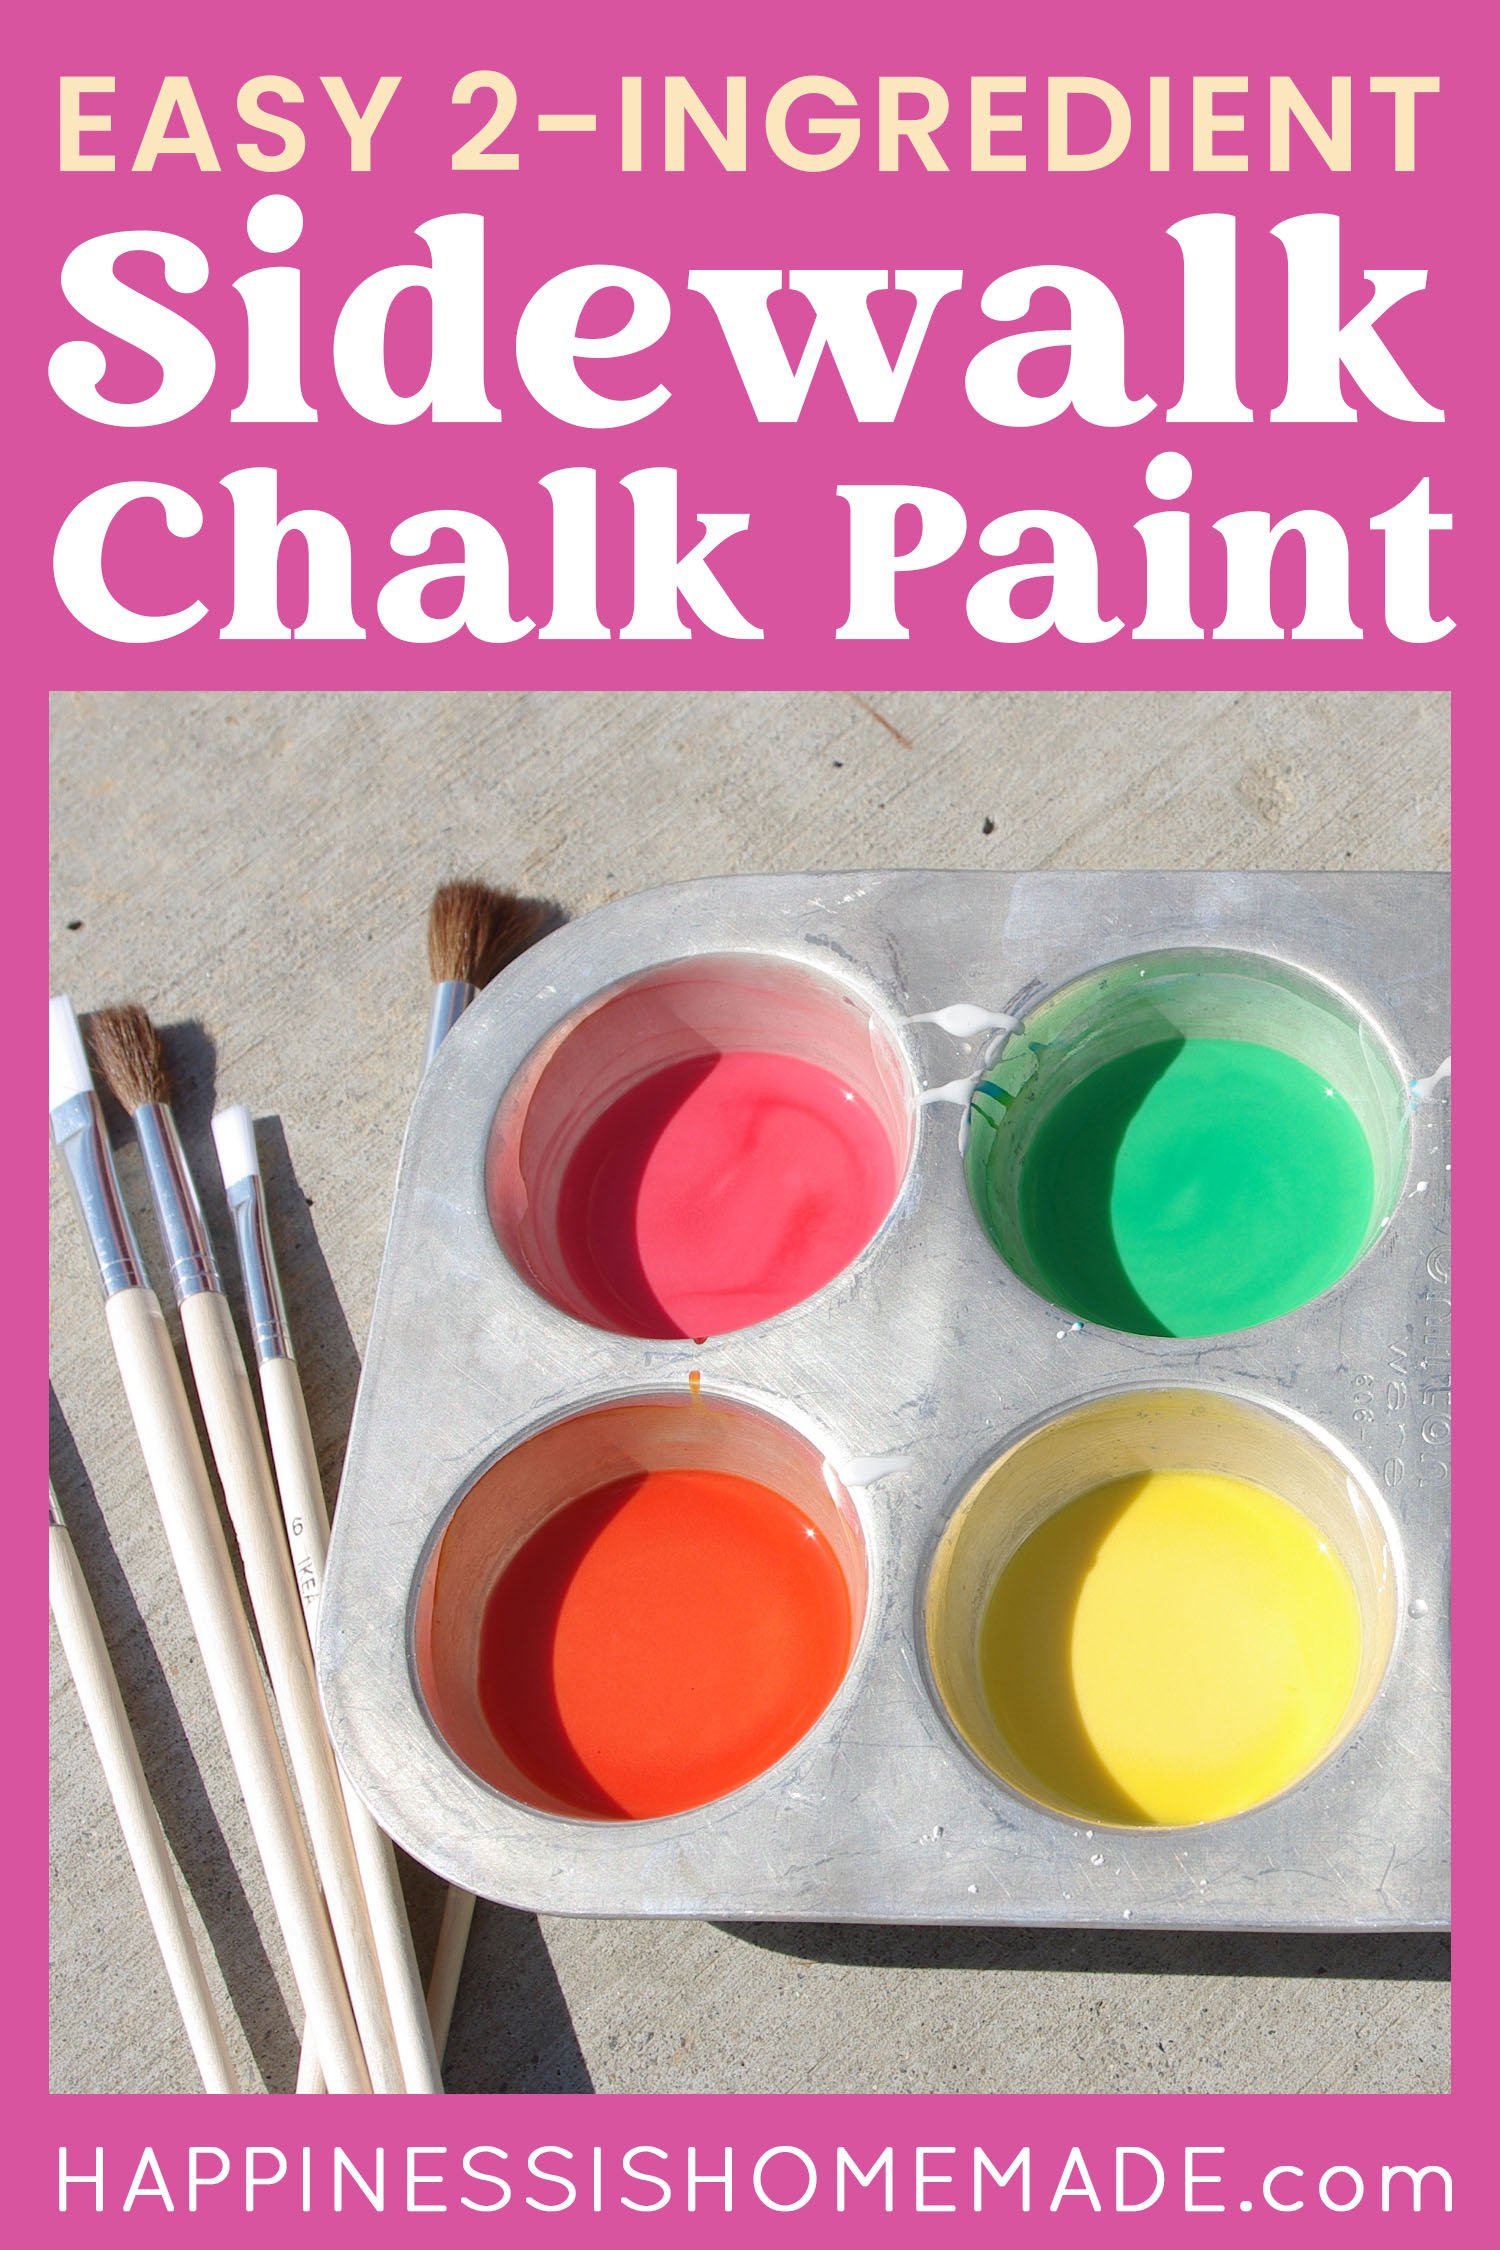 "Easy 2-Ingredient Sidewalk Chalk Paint" graphic on pink background with colorful chalk paint in muffin tin